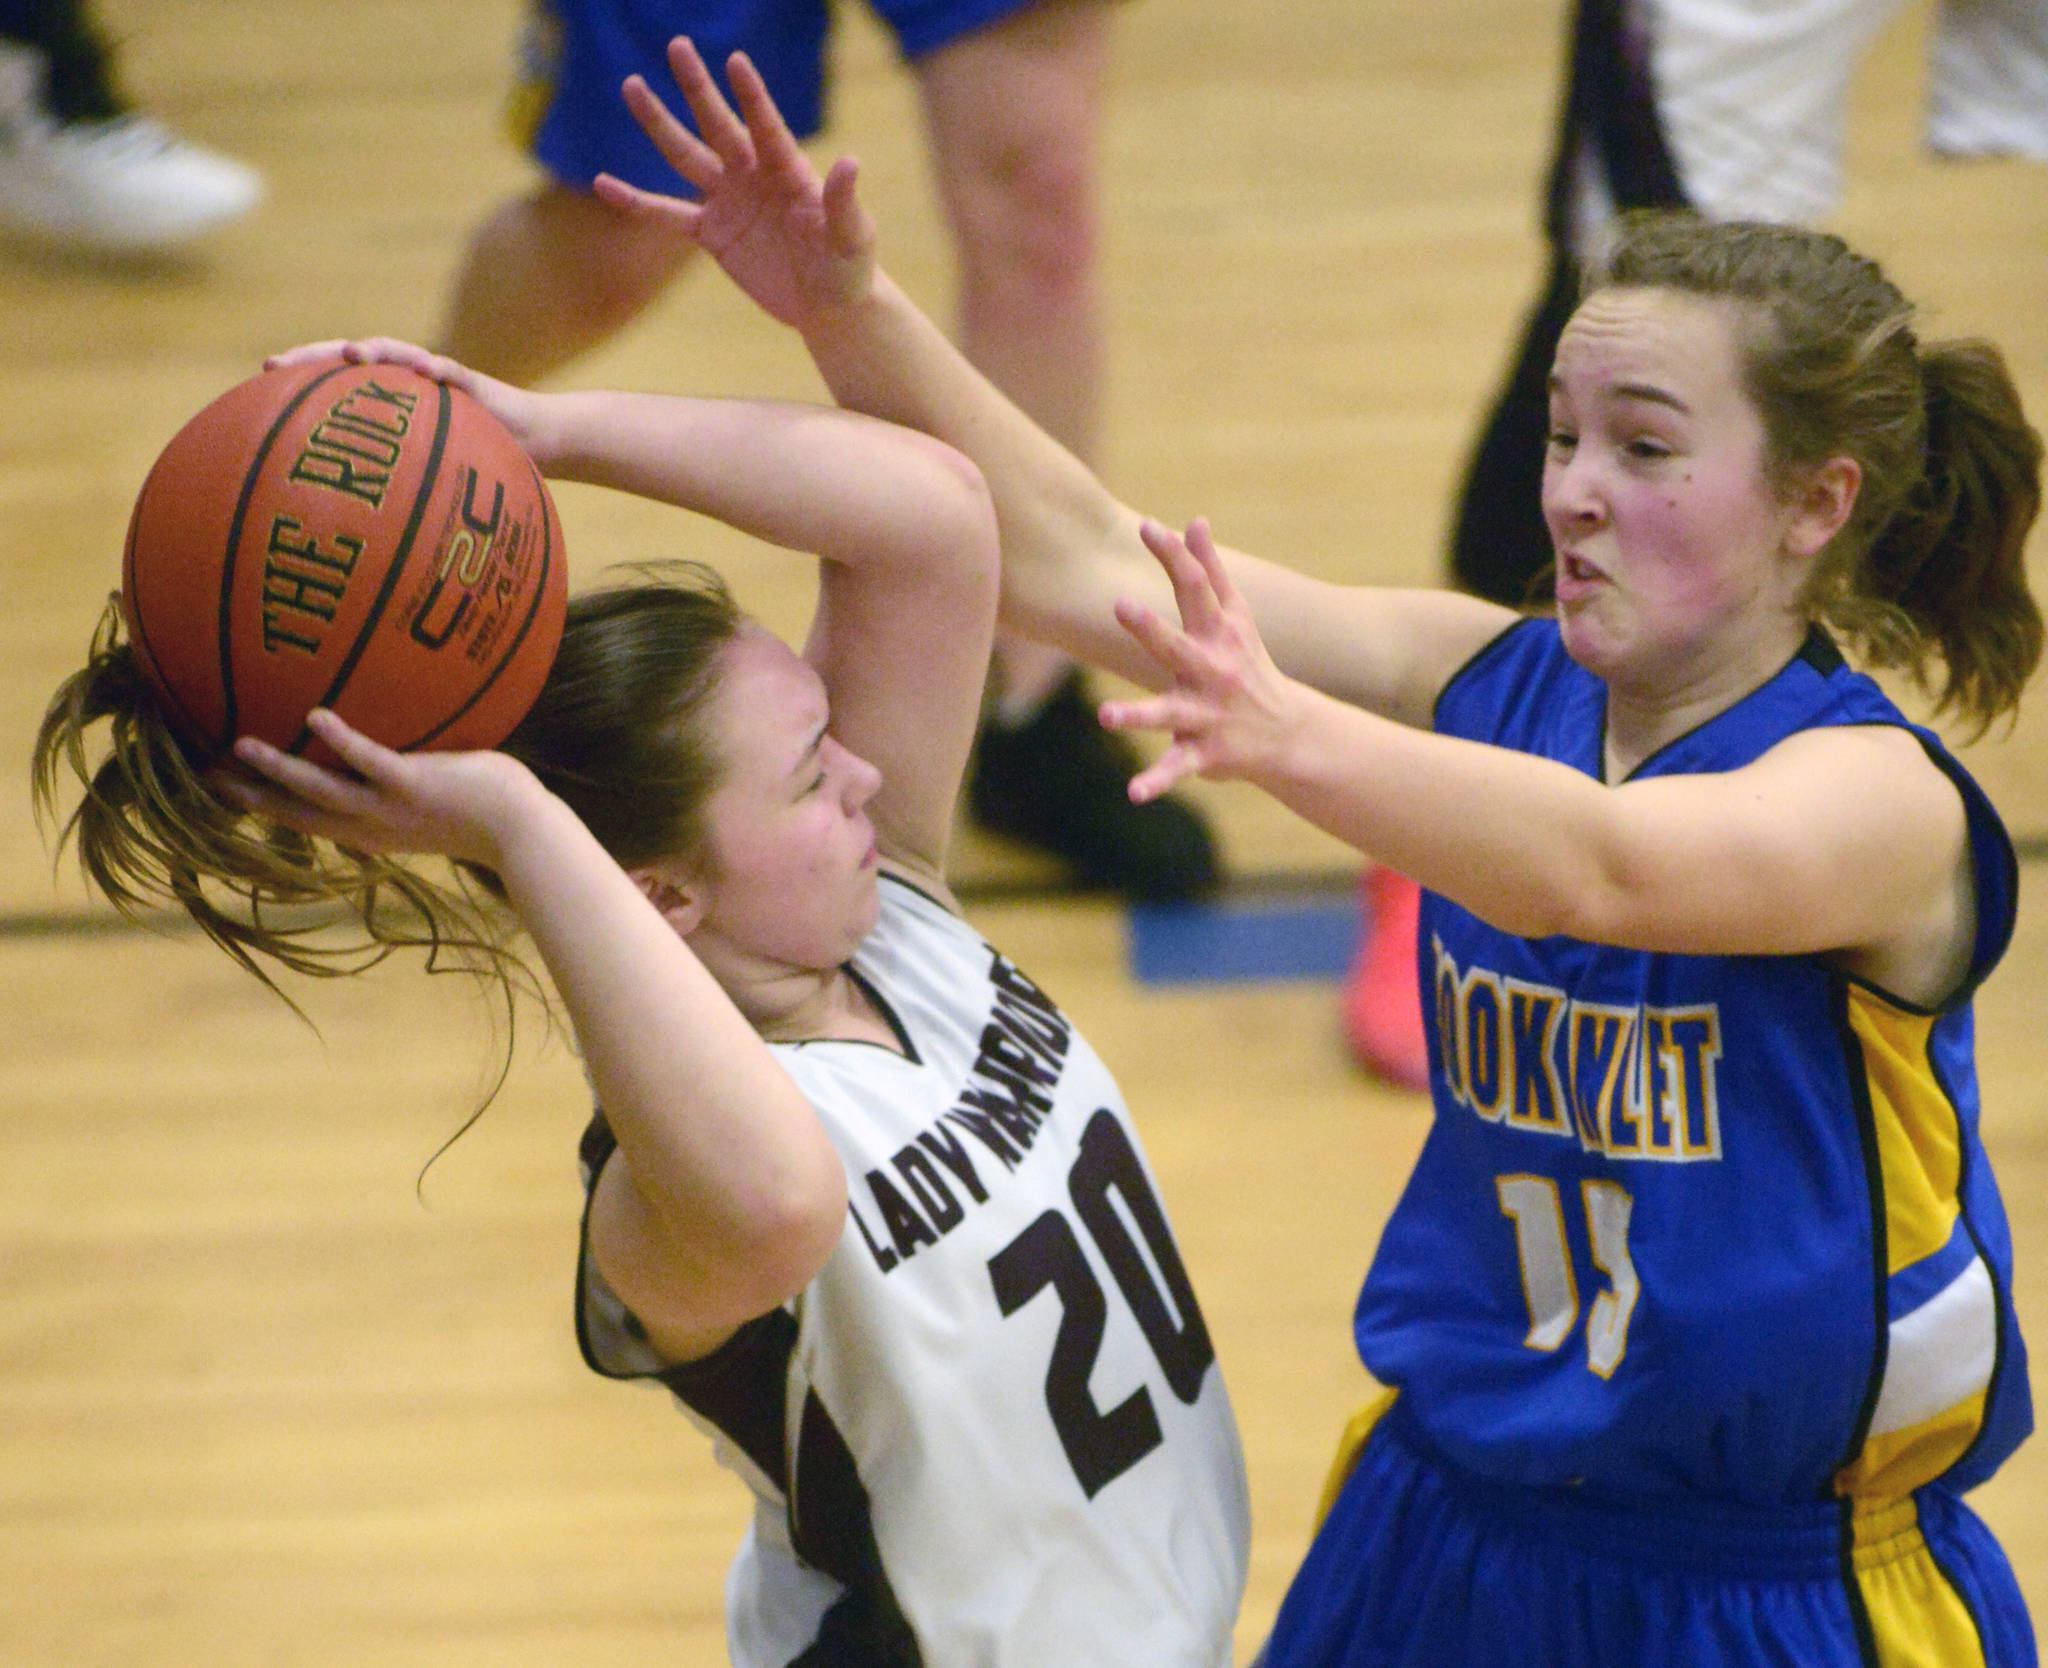 Cook Inlet Academy’s Addie Nelson pressures Nikolaevsk’s Krystyana Kalugin on Friday during the Peninsula Conference girls championship at Cook Inlet Academy in Soldotna. (Photo by Jeff Helminiak/Peninsula Clarion)